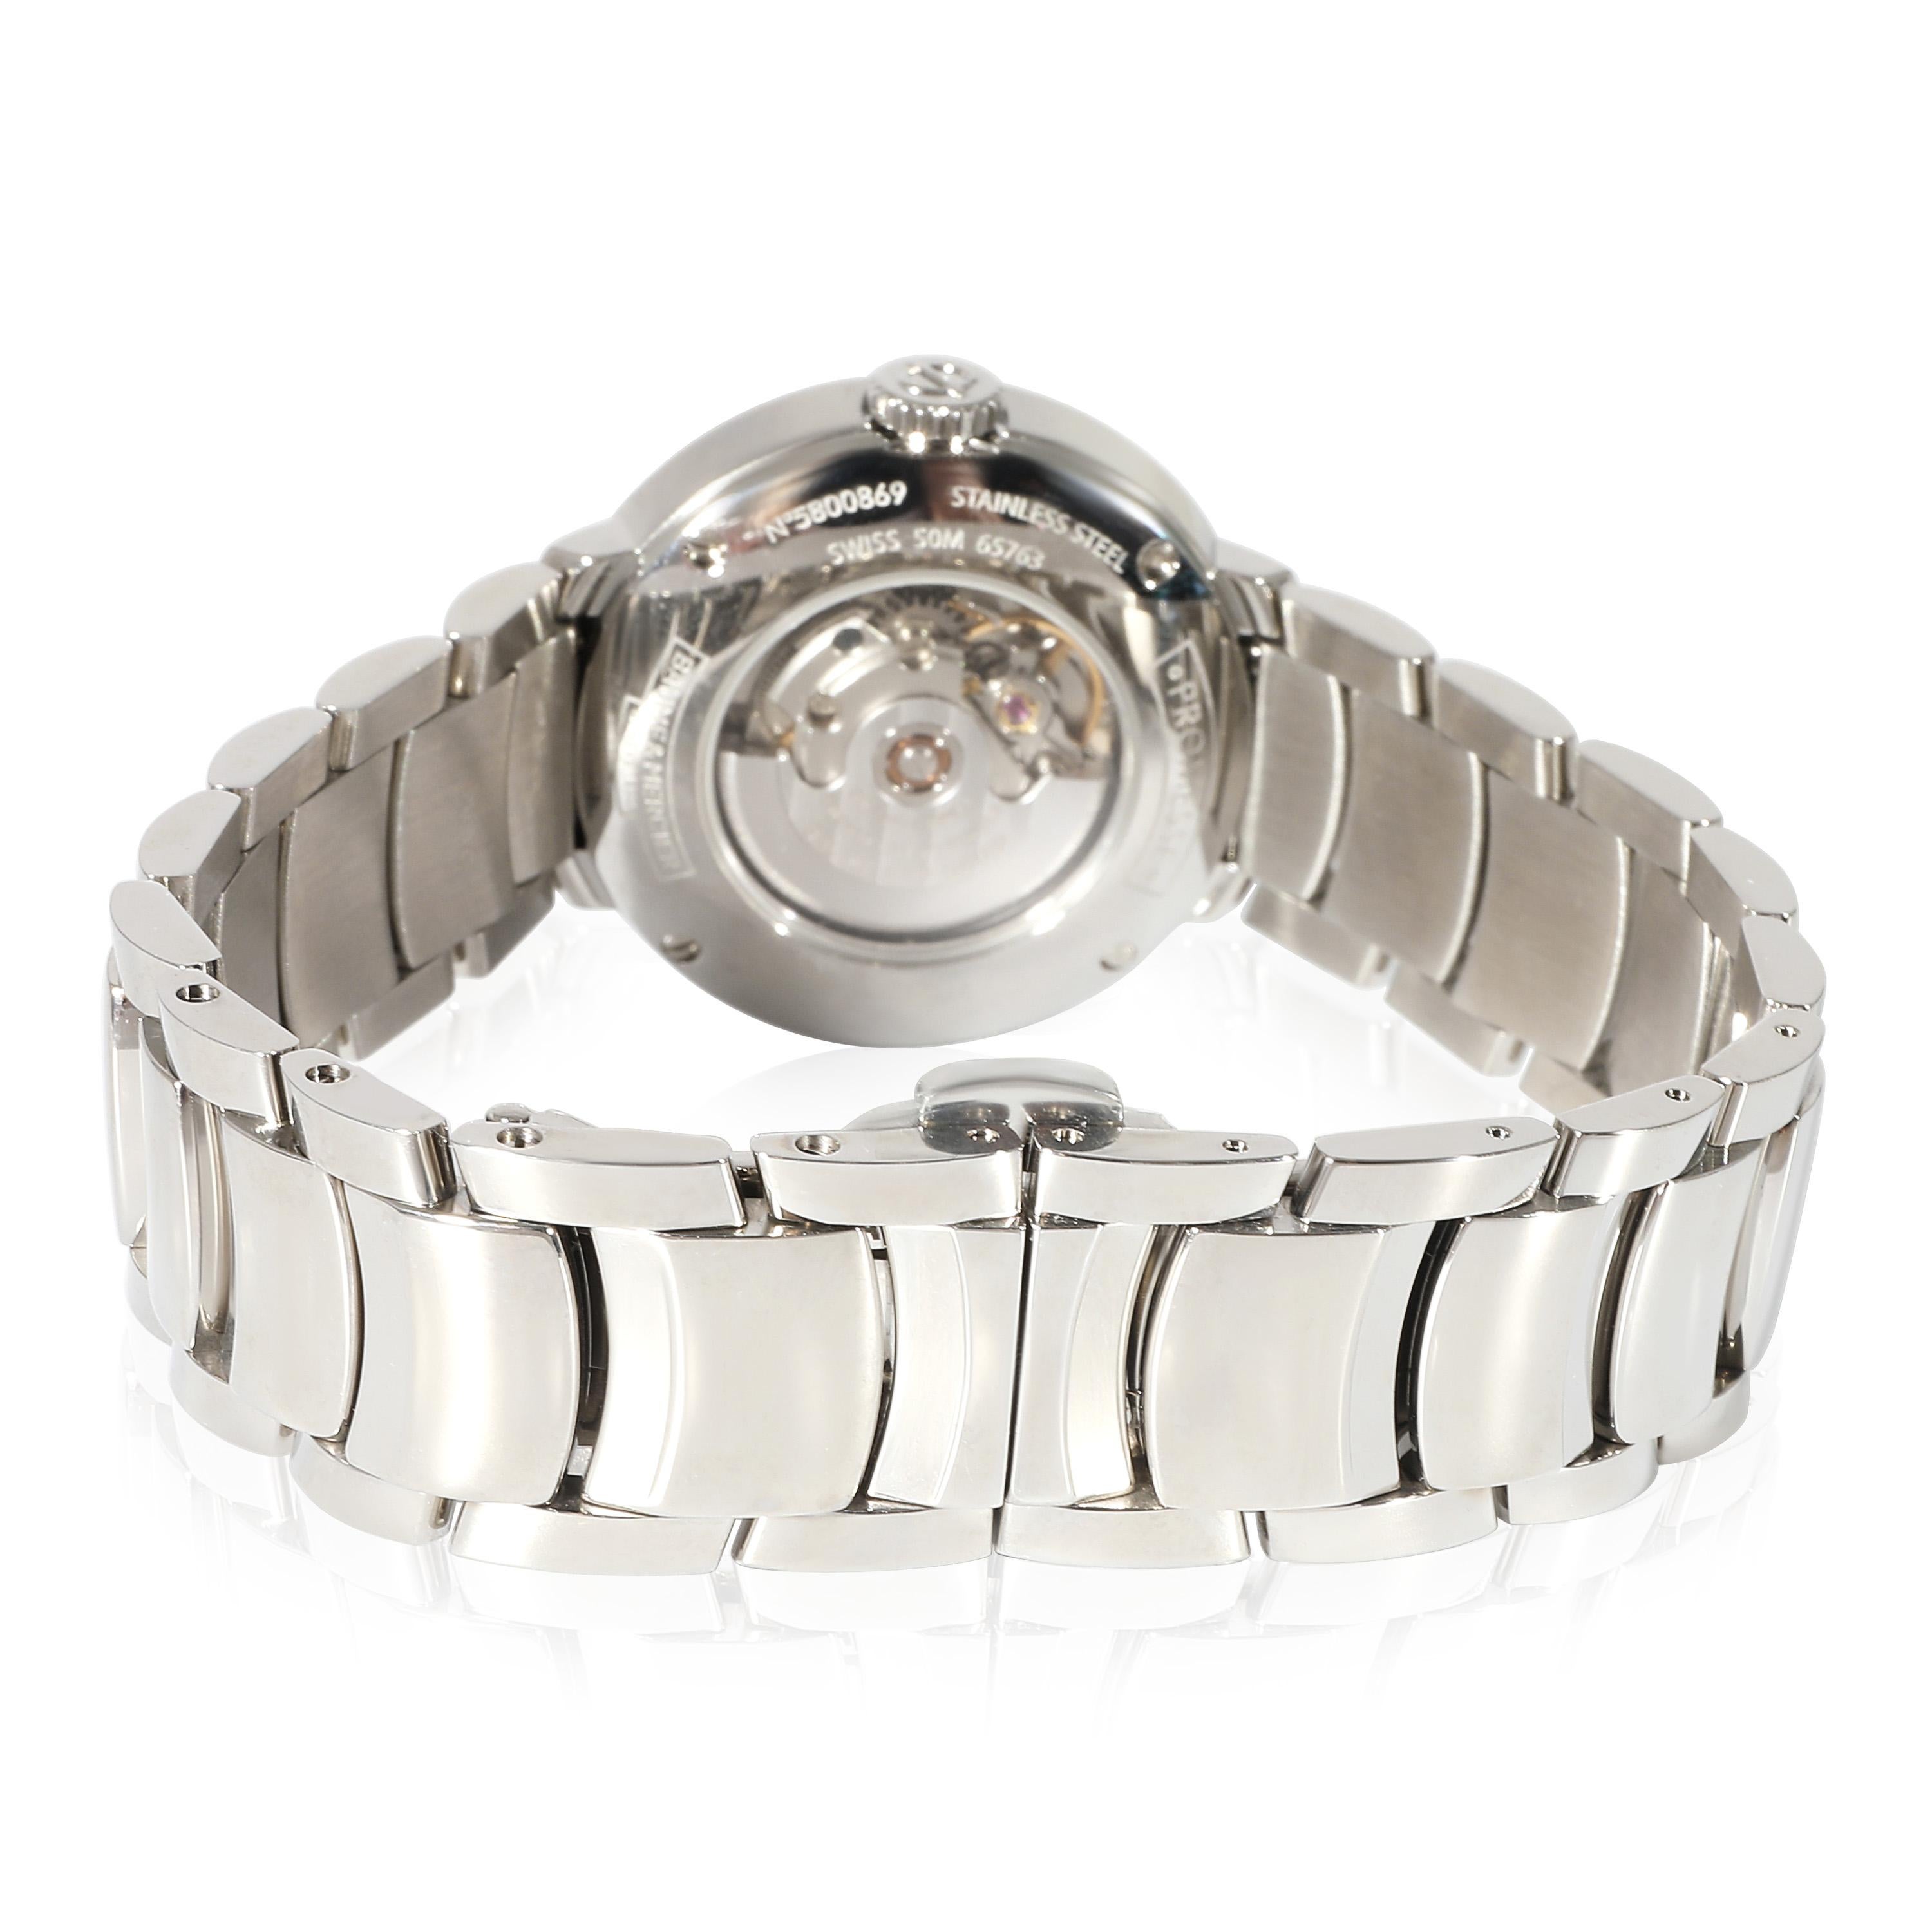 Baume & Mercier Promesse MOA10182 Women's Watch in  Stainless Steel

SKU: 133841

PRIMARY DETAILS
Brand: Baume & Mercier
Model: Promesse
Country of Origin: Switzerland
Movement Type: Mechanical: Automatic/Kinetic
Year of Manufacture: